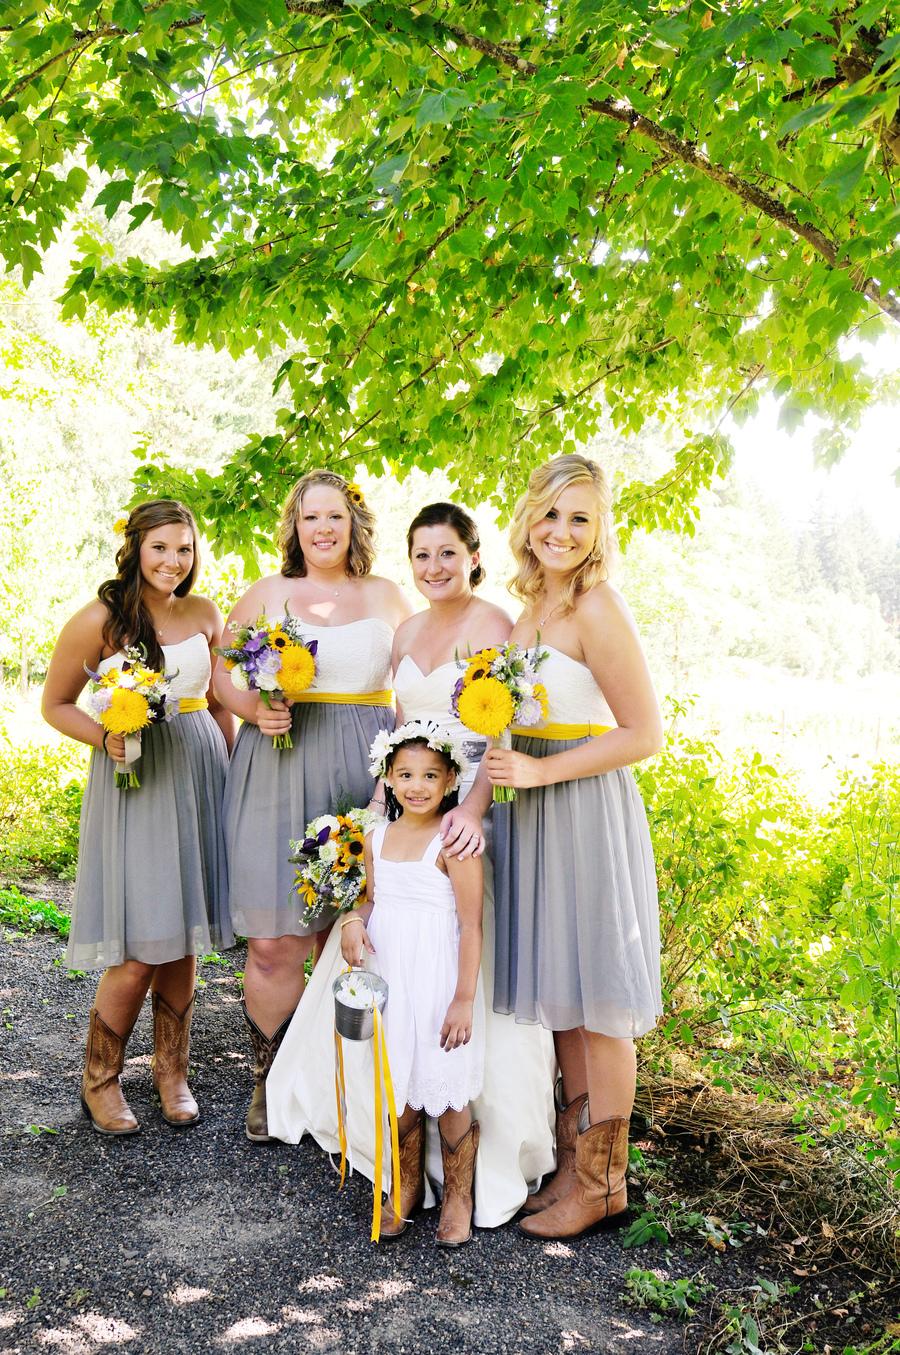 GBD259 Gray White Short Strapless Country Bridesmaid Dress with Cowboy Boots